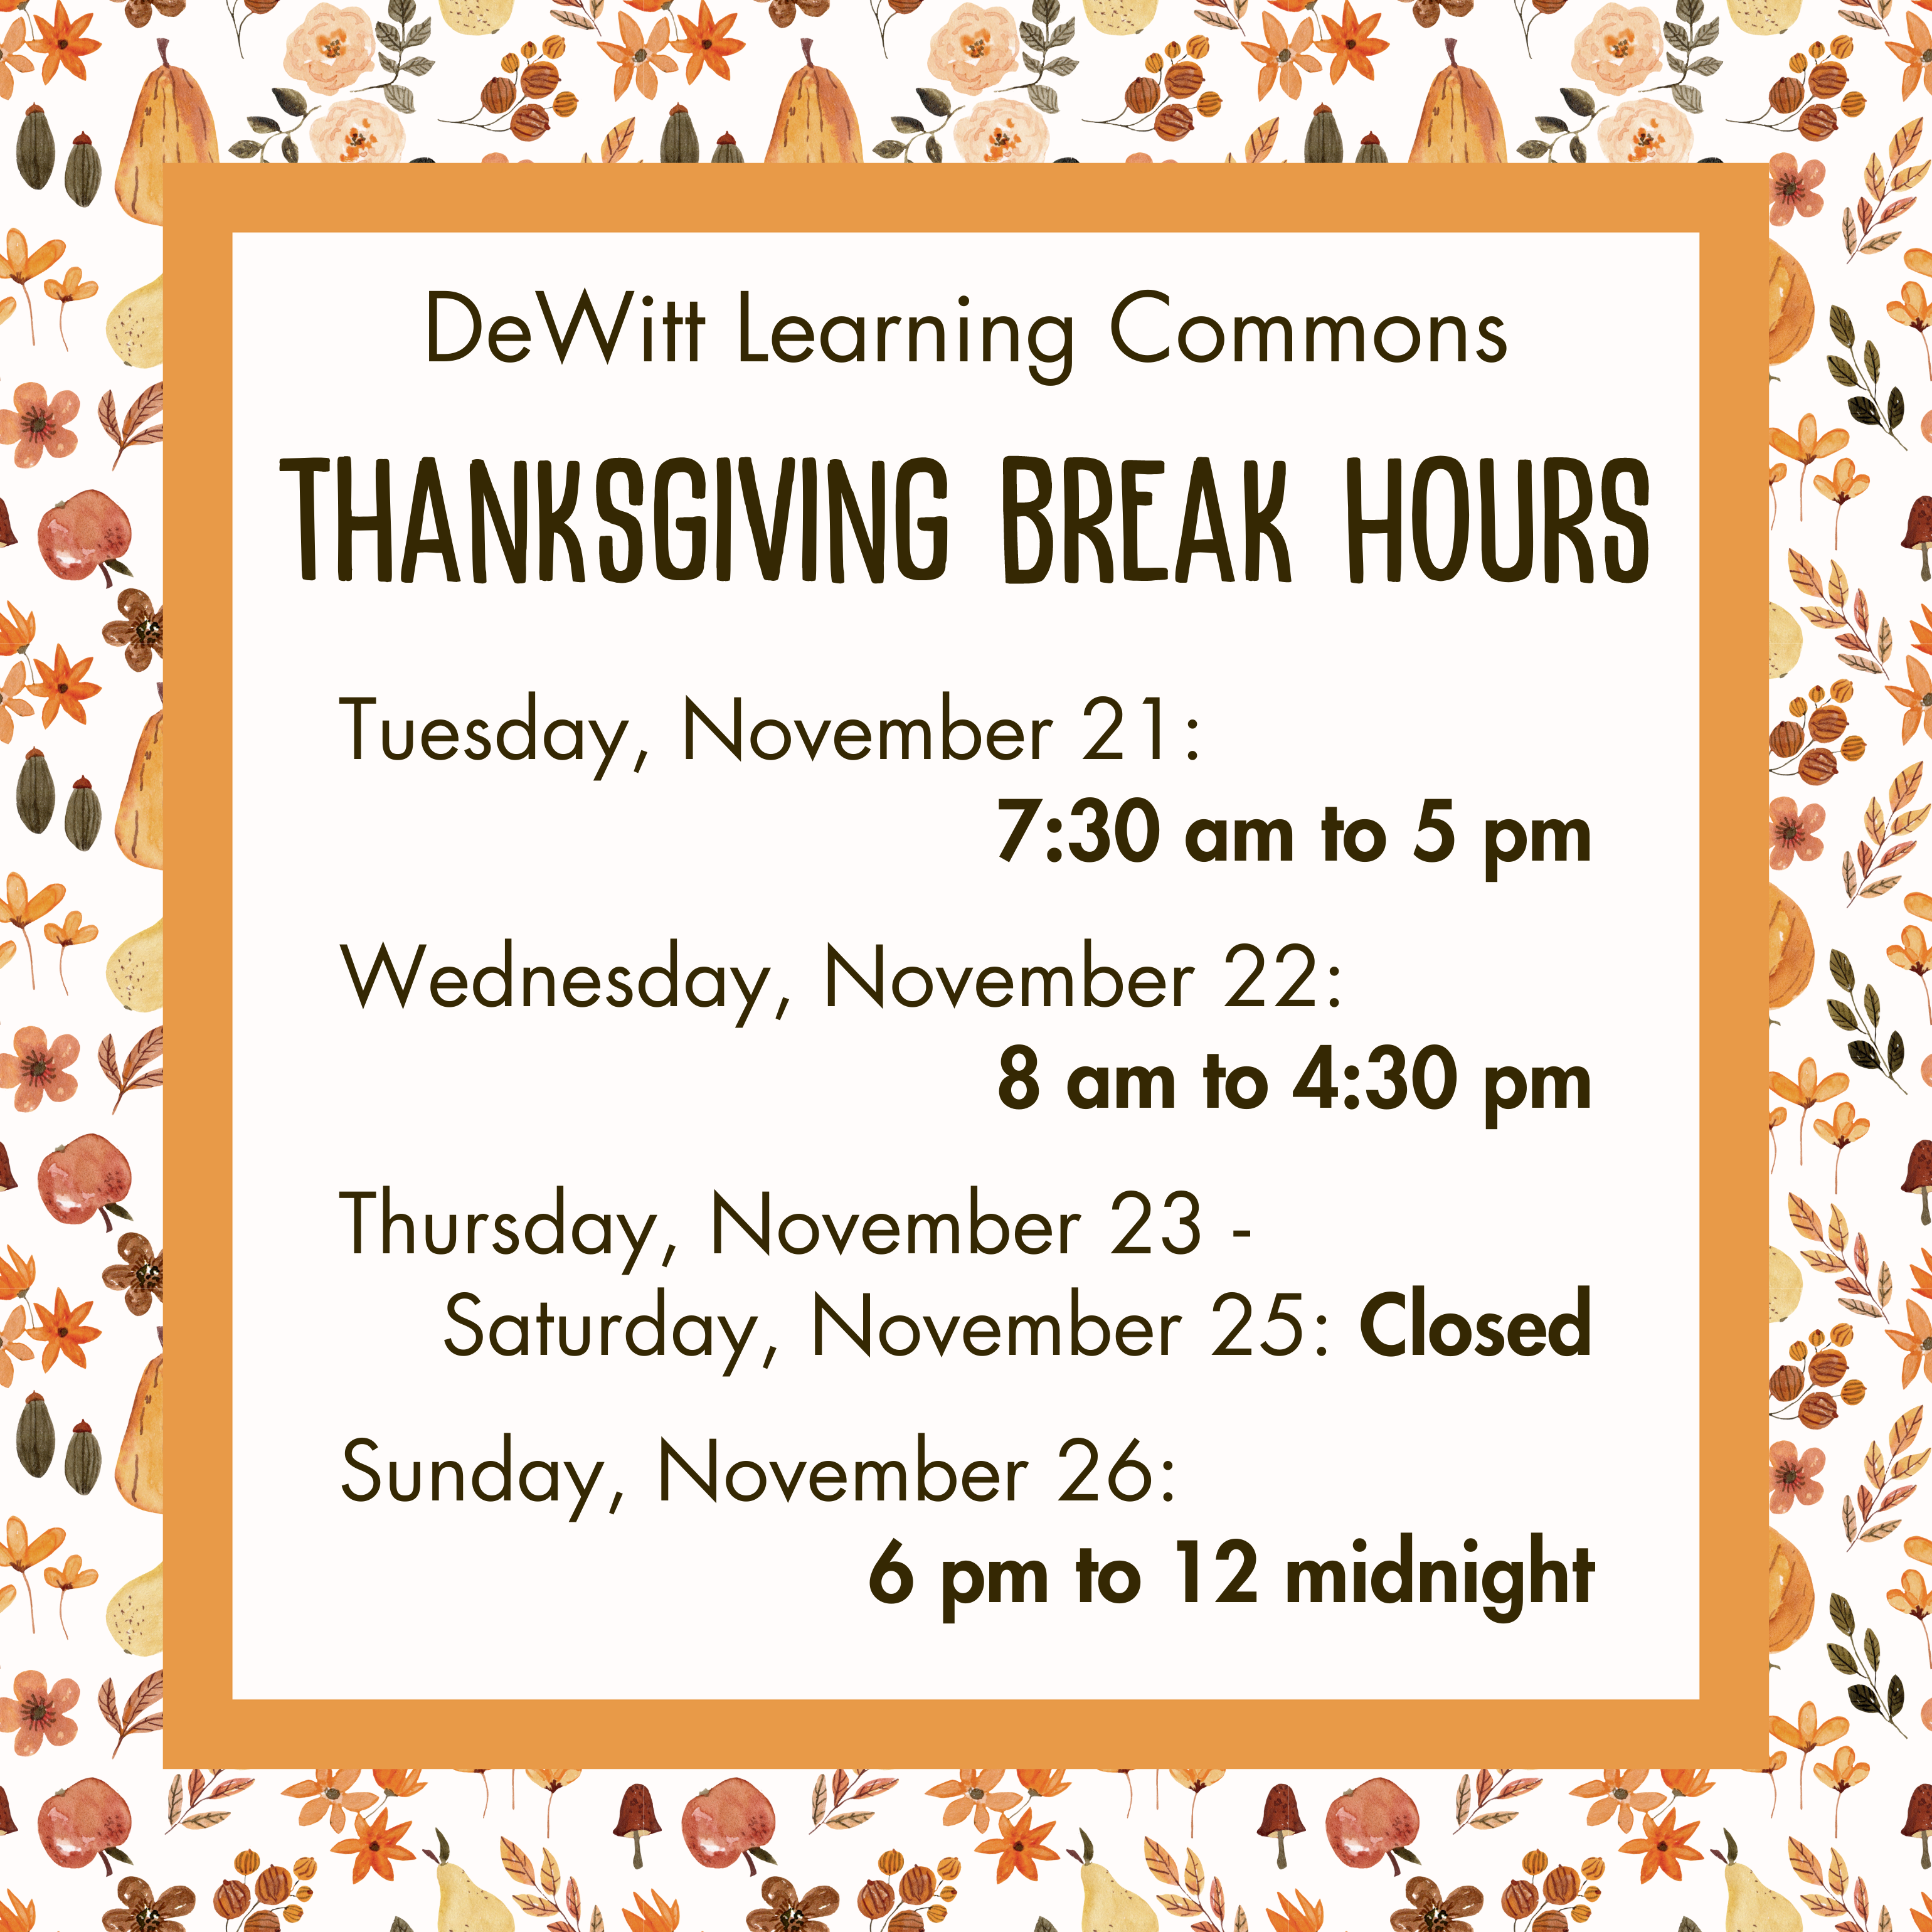 DeWitt Learning Commons Thanksgiving Break Hours: Tuesday, November 21: 7:30 am to 5 pm;  Wednesday, November 22: 8 am to 4:30 pm;  Thursday, November 23 - Saturday, November 25: Closed;  Sunday, November 26: 6 pm to 12 midnight.